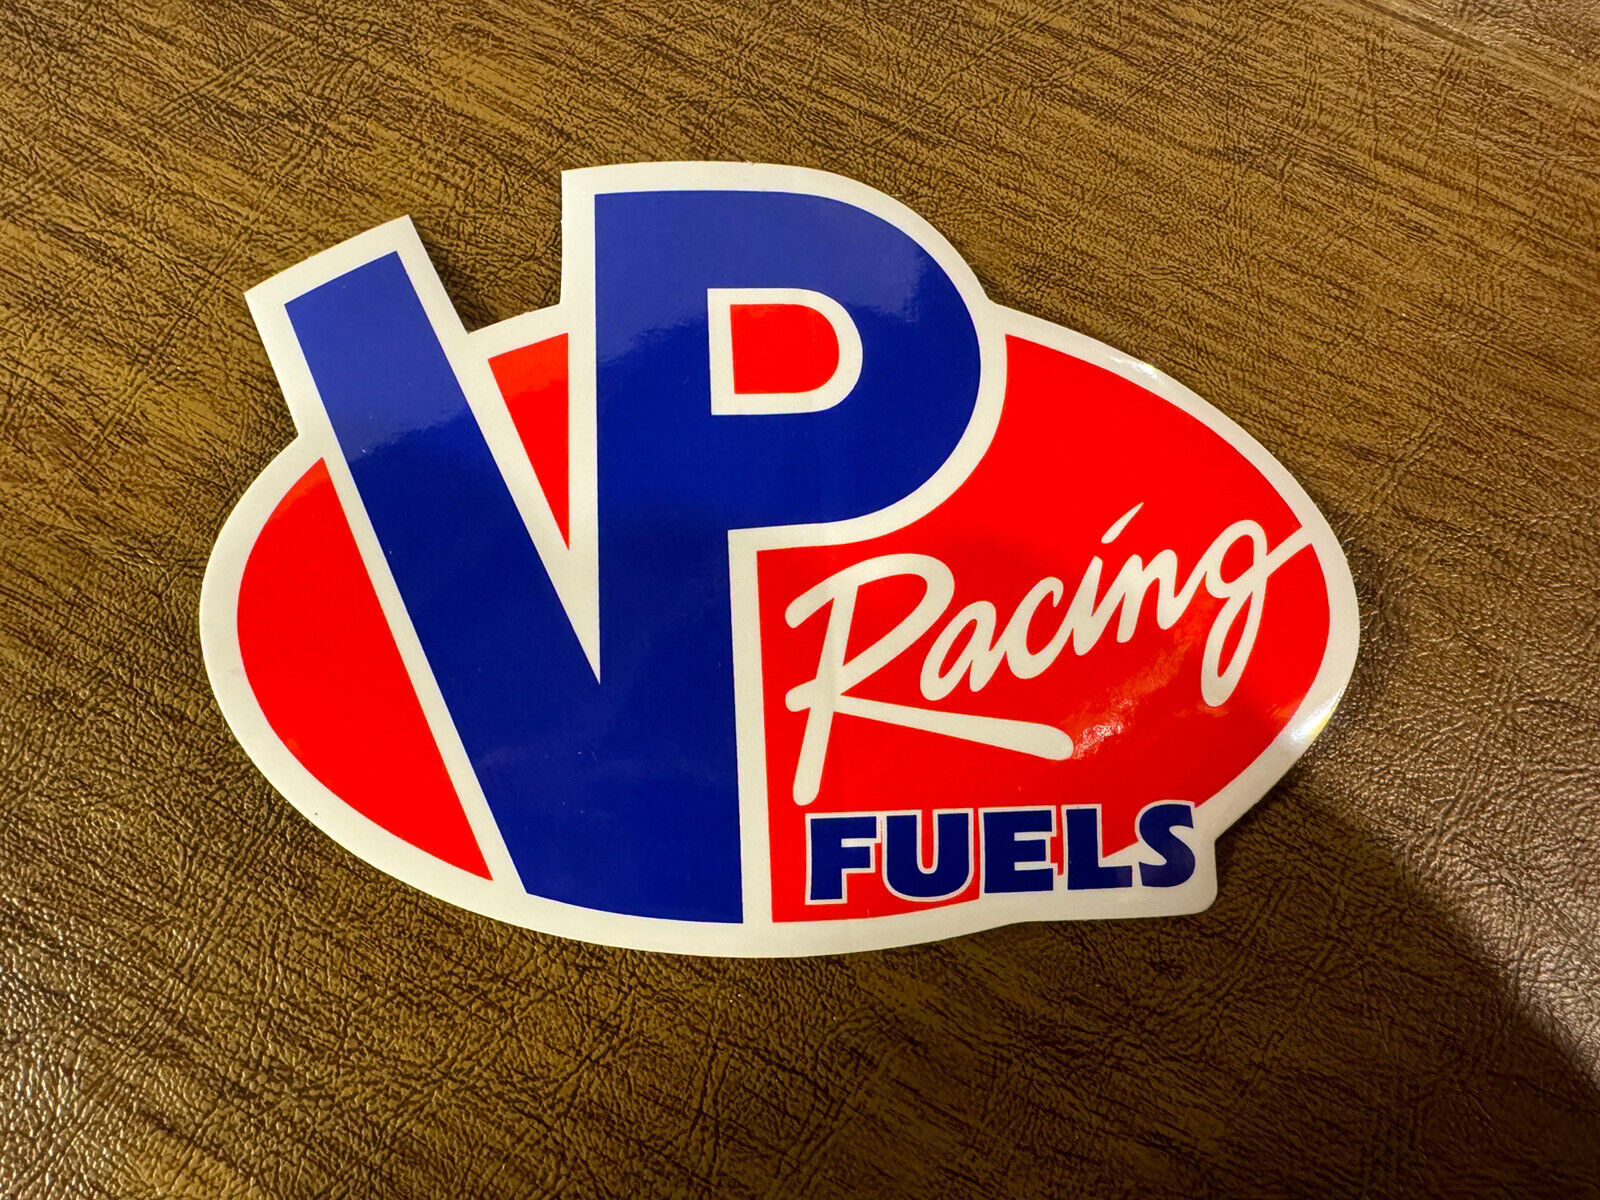 Large 7” x 5” VP Racing Fuels Sticker in Mint Condition. Great Looking Sticker.